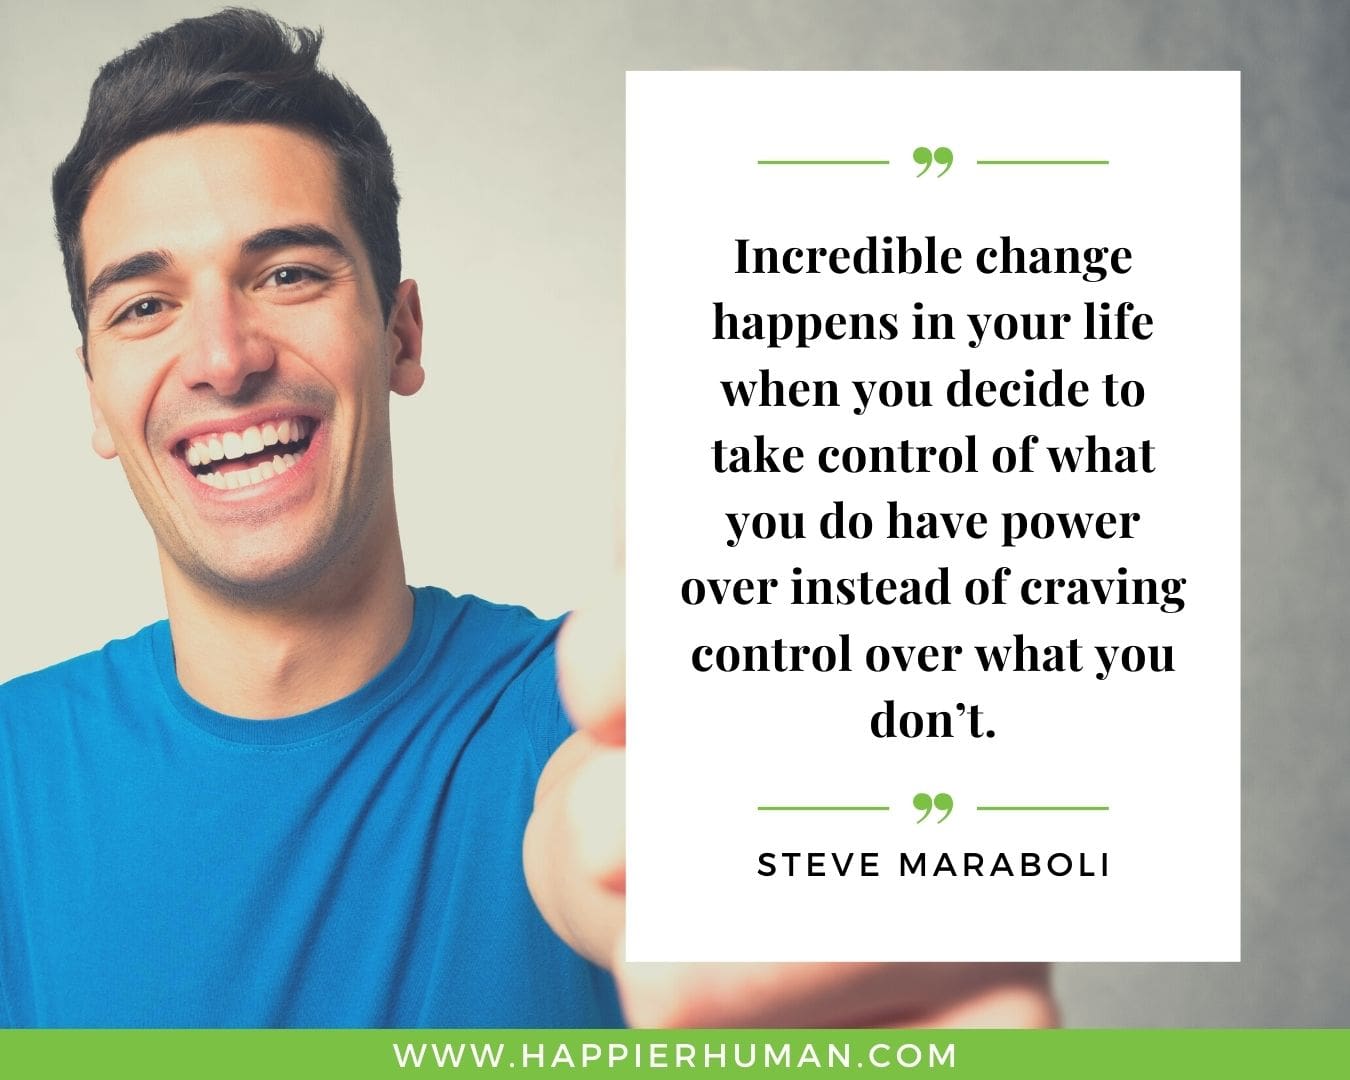 Positive Energy Quotes - “Incredible change happens in your life when you decide to take control of what you do have power over instead of craving control over what you don’t.” - Steve Maraboli